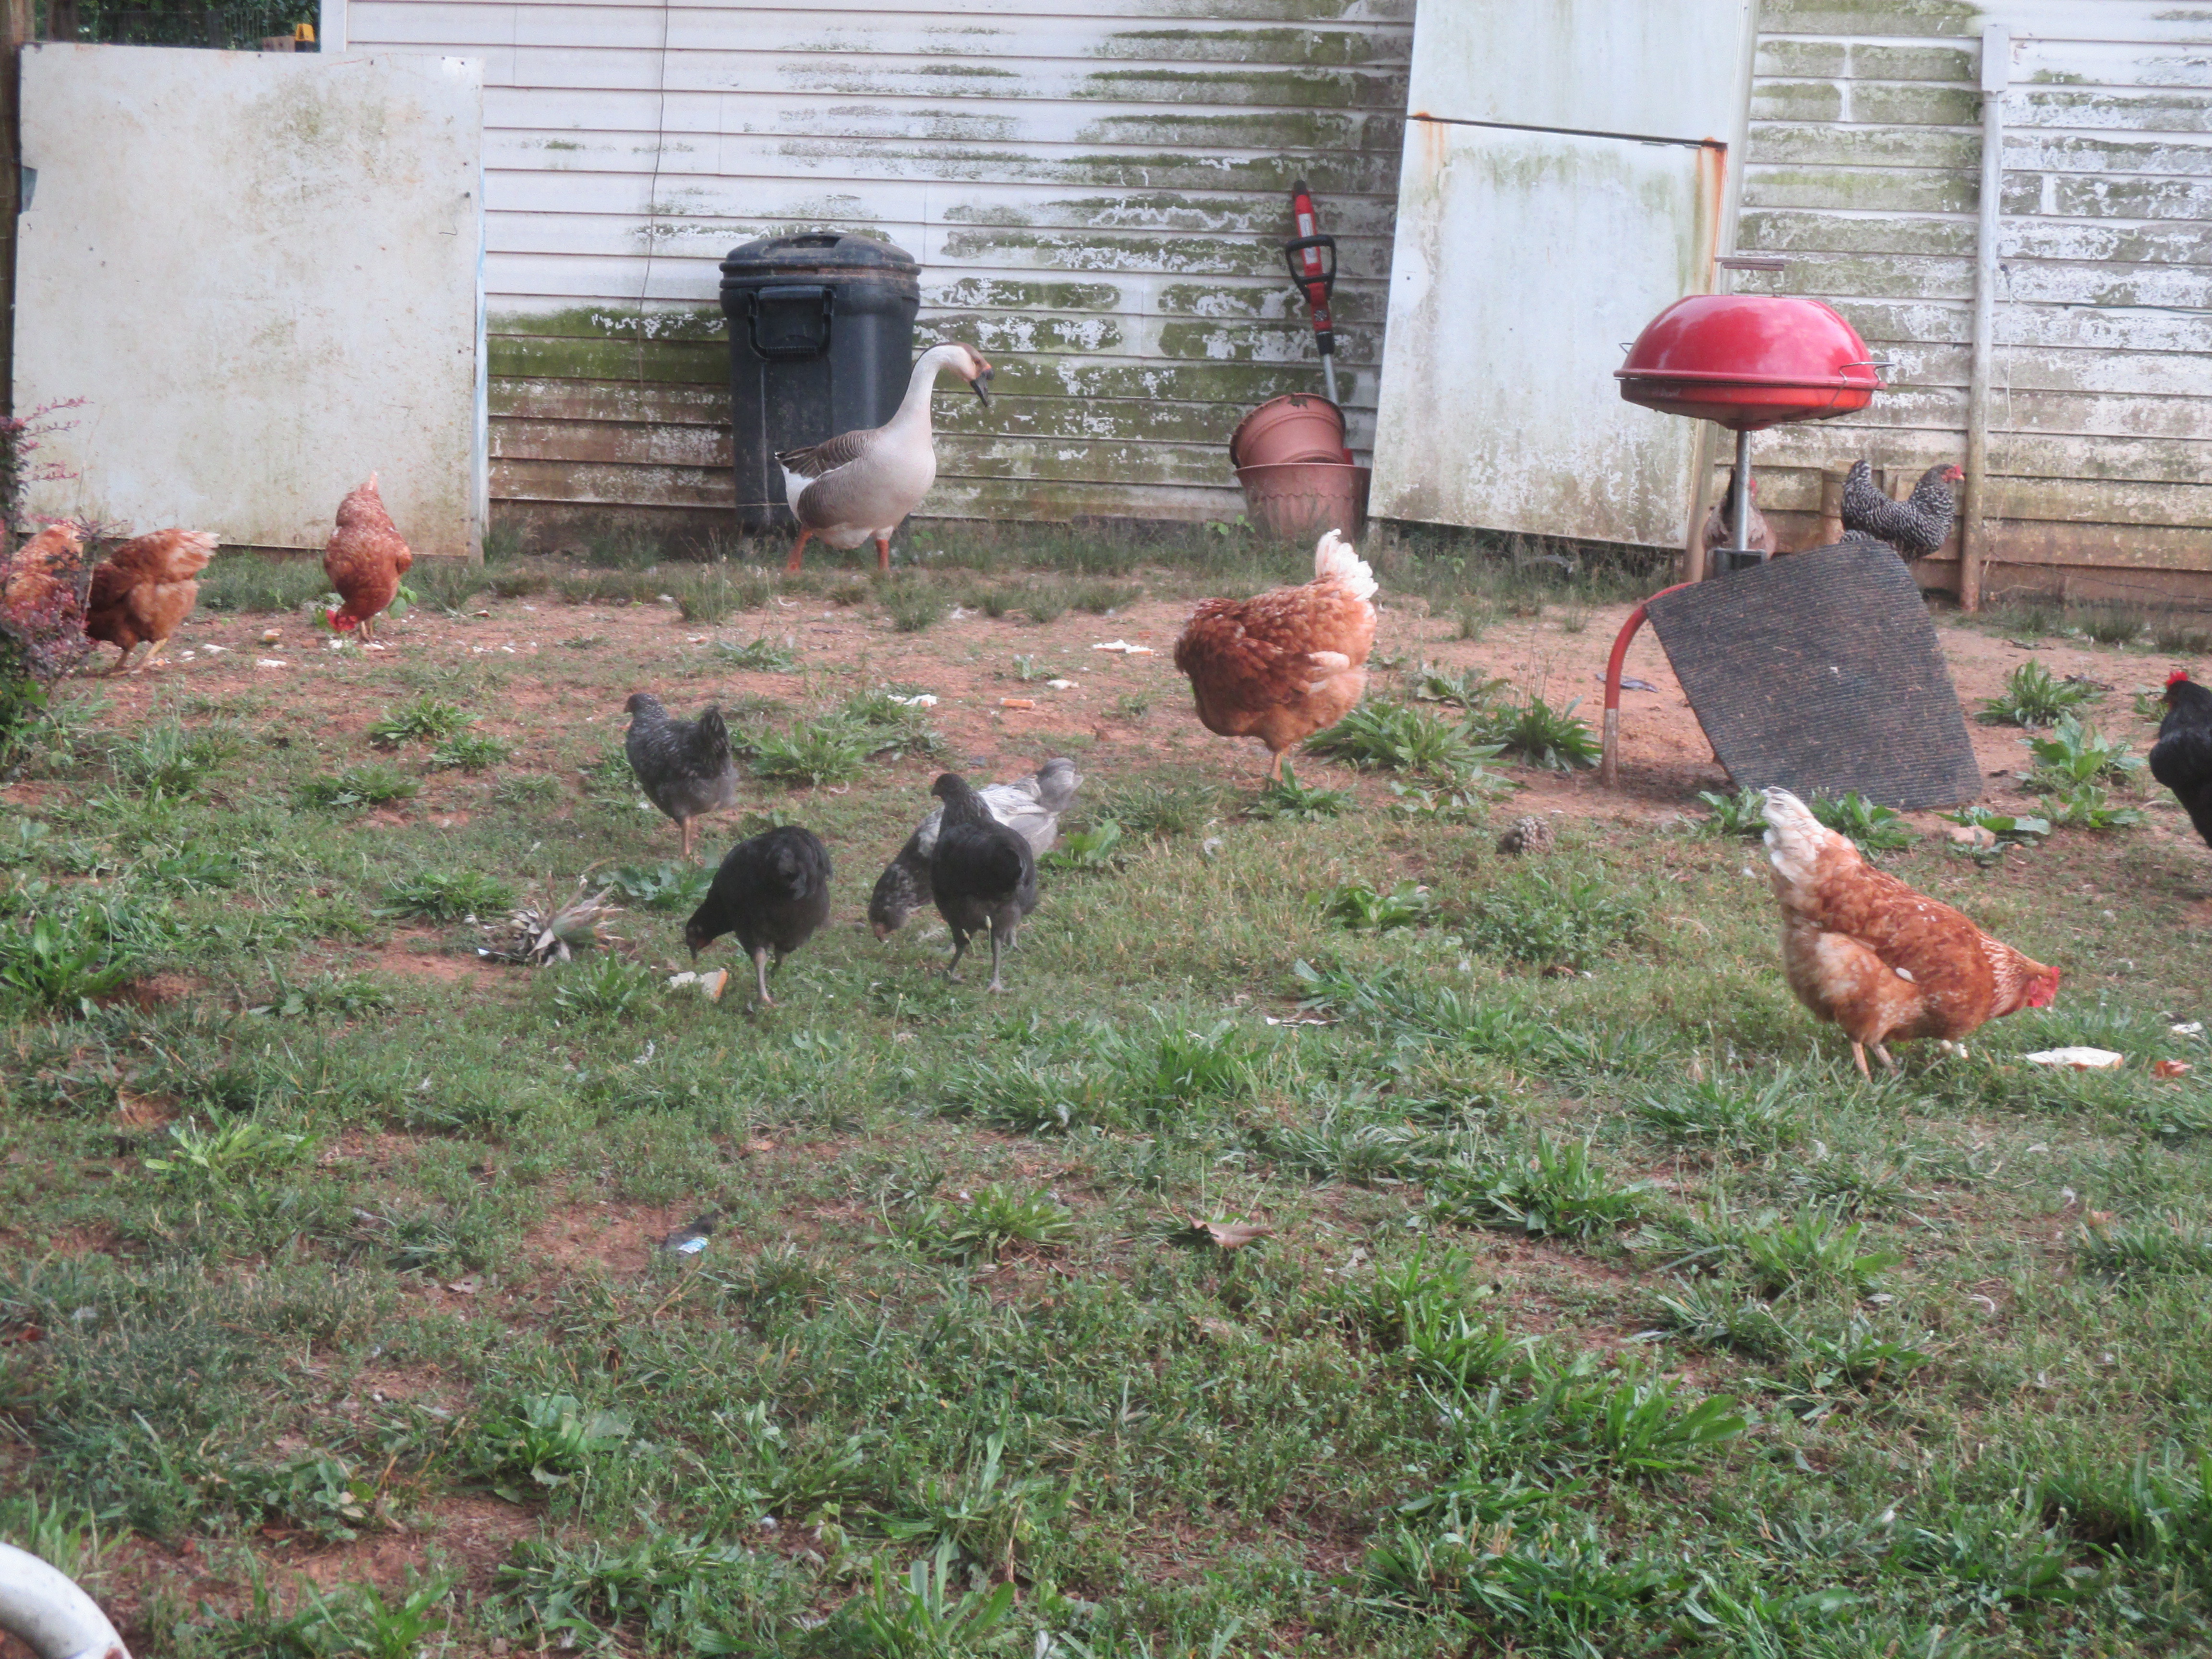 These are a few of my 25 chickens (laying hens) in my "backyard", by chance.